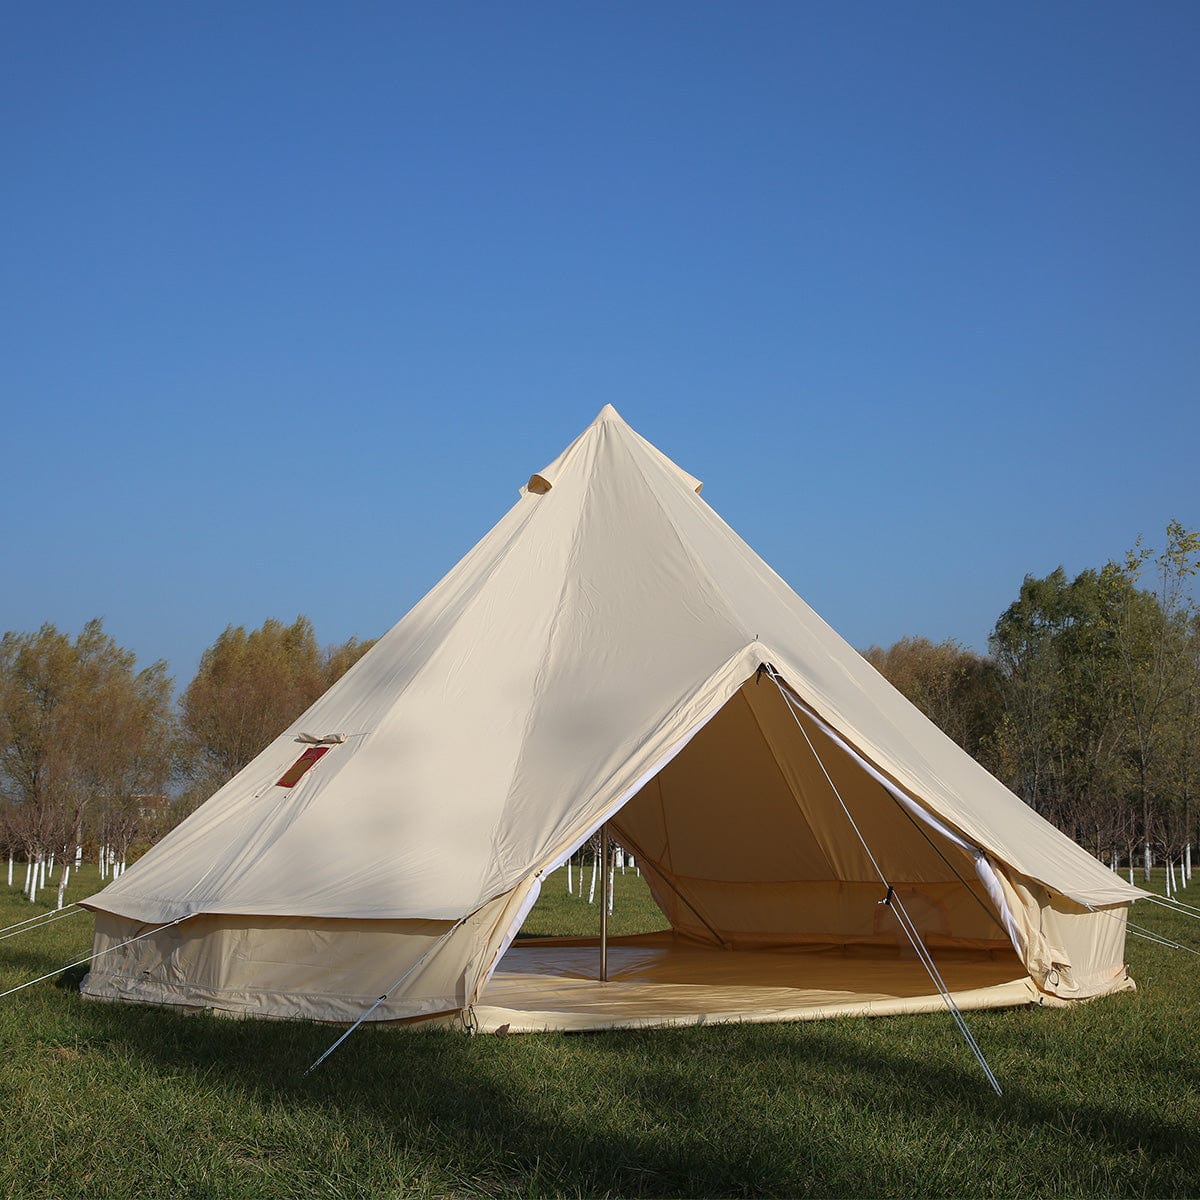 Comfortable Coast Bell Tents 6m Canvas Bell Tent Luna Canvas Bell Tents 4m/5m/6m- LCBT456m